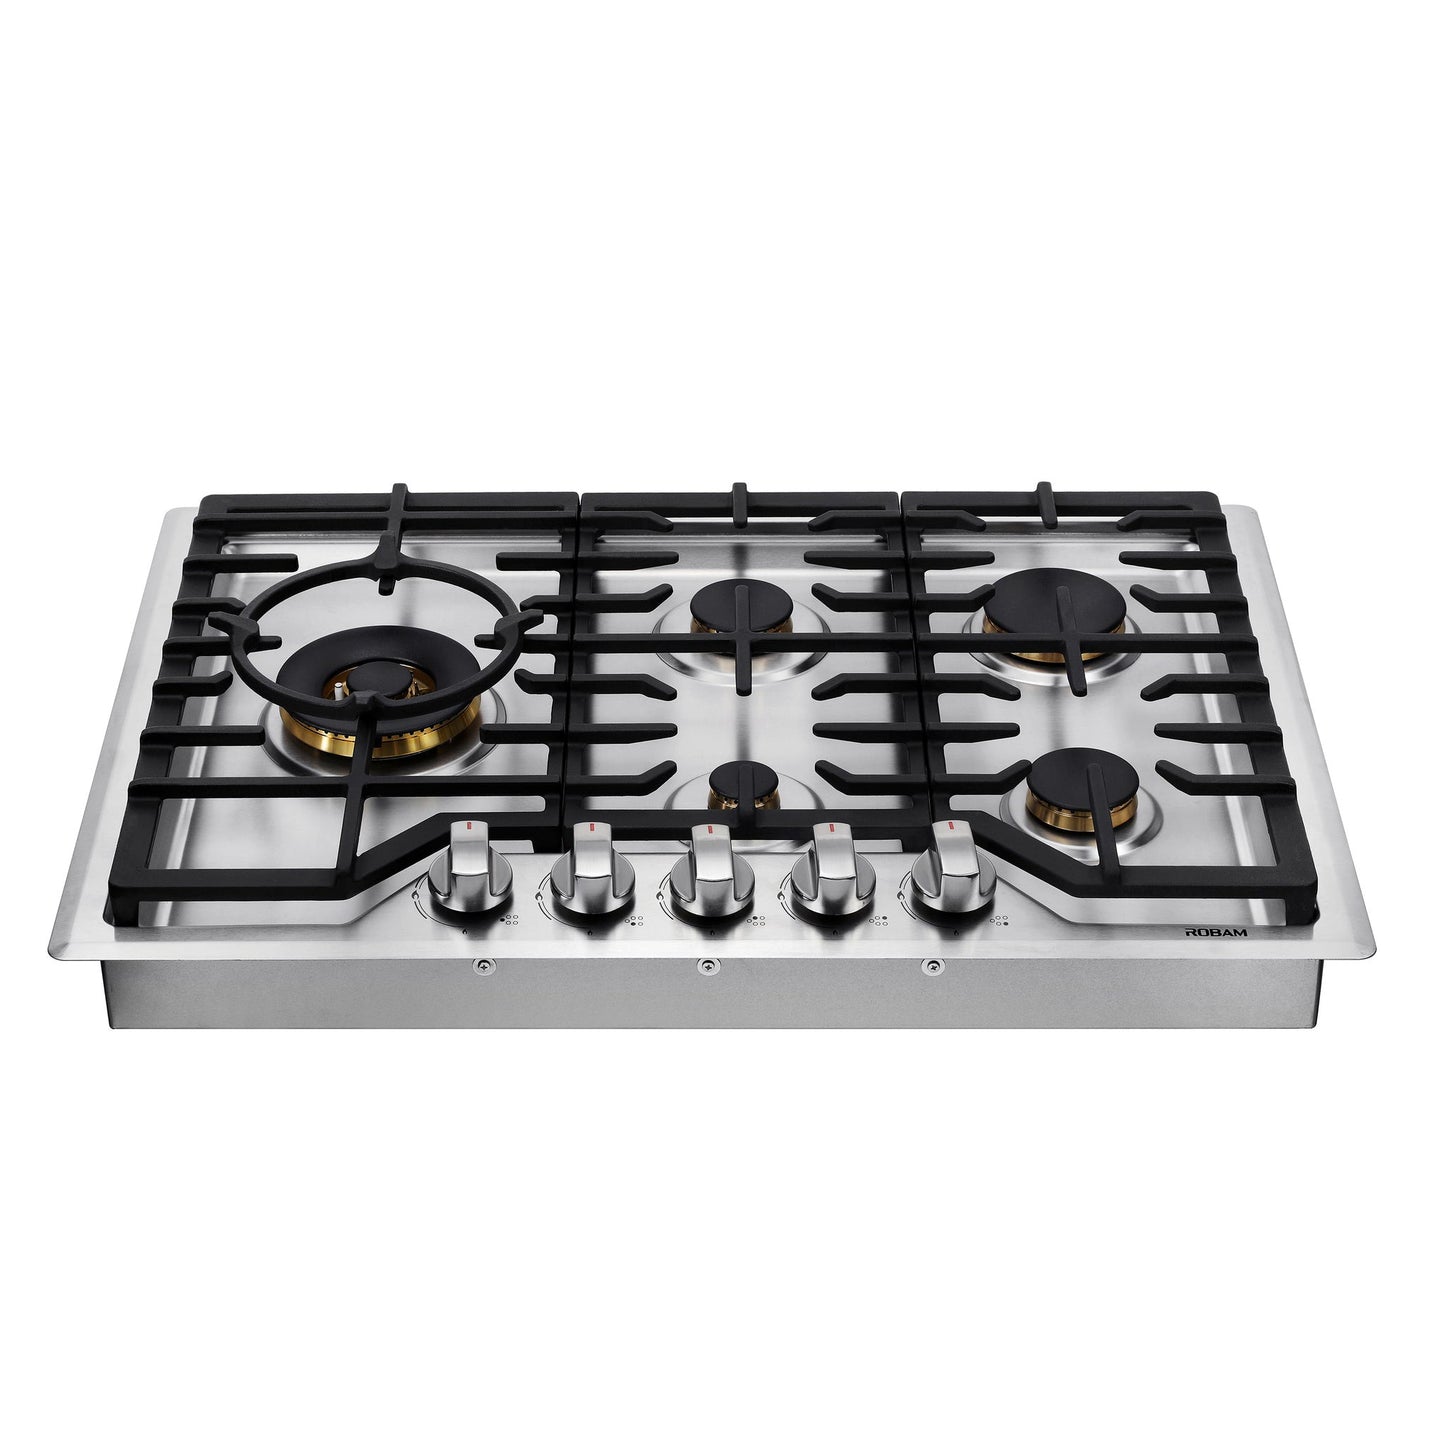 Robam G-Series 30" Drop-In Stainless Steel 5 Burner Gas Cooktop Stove